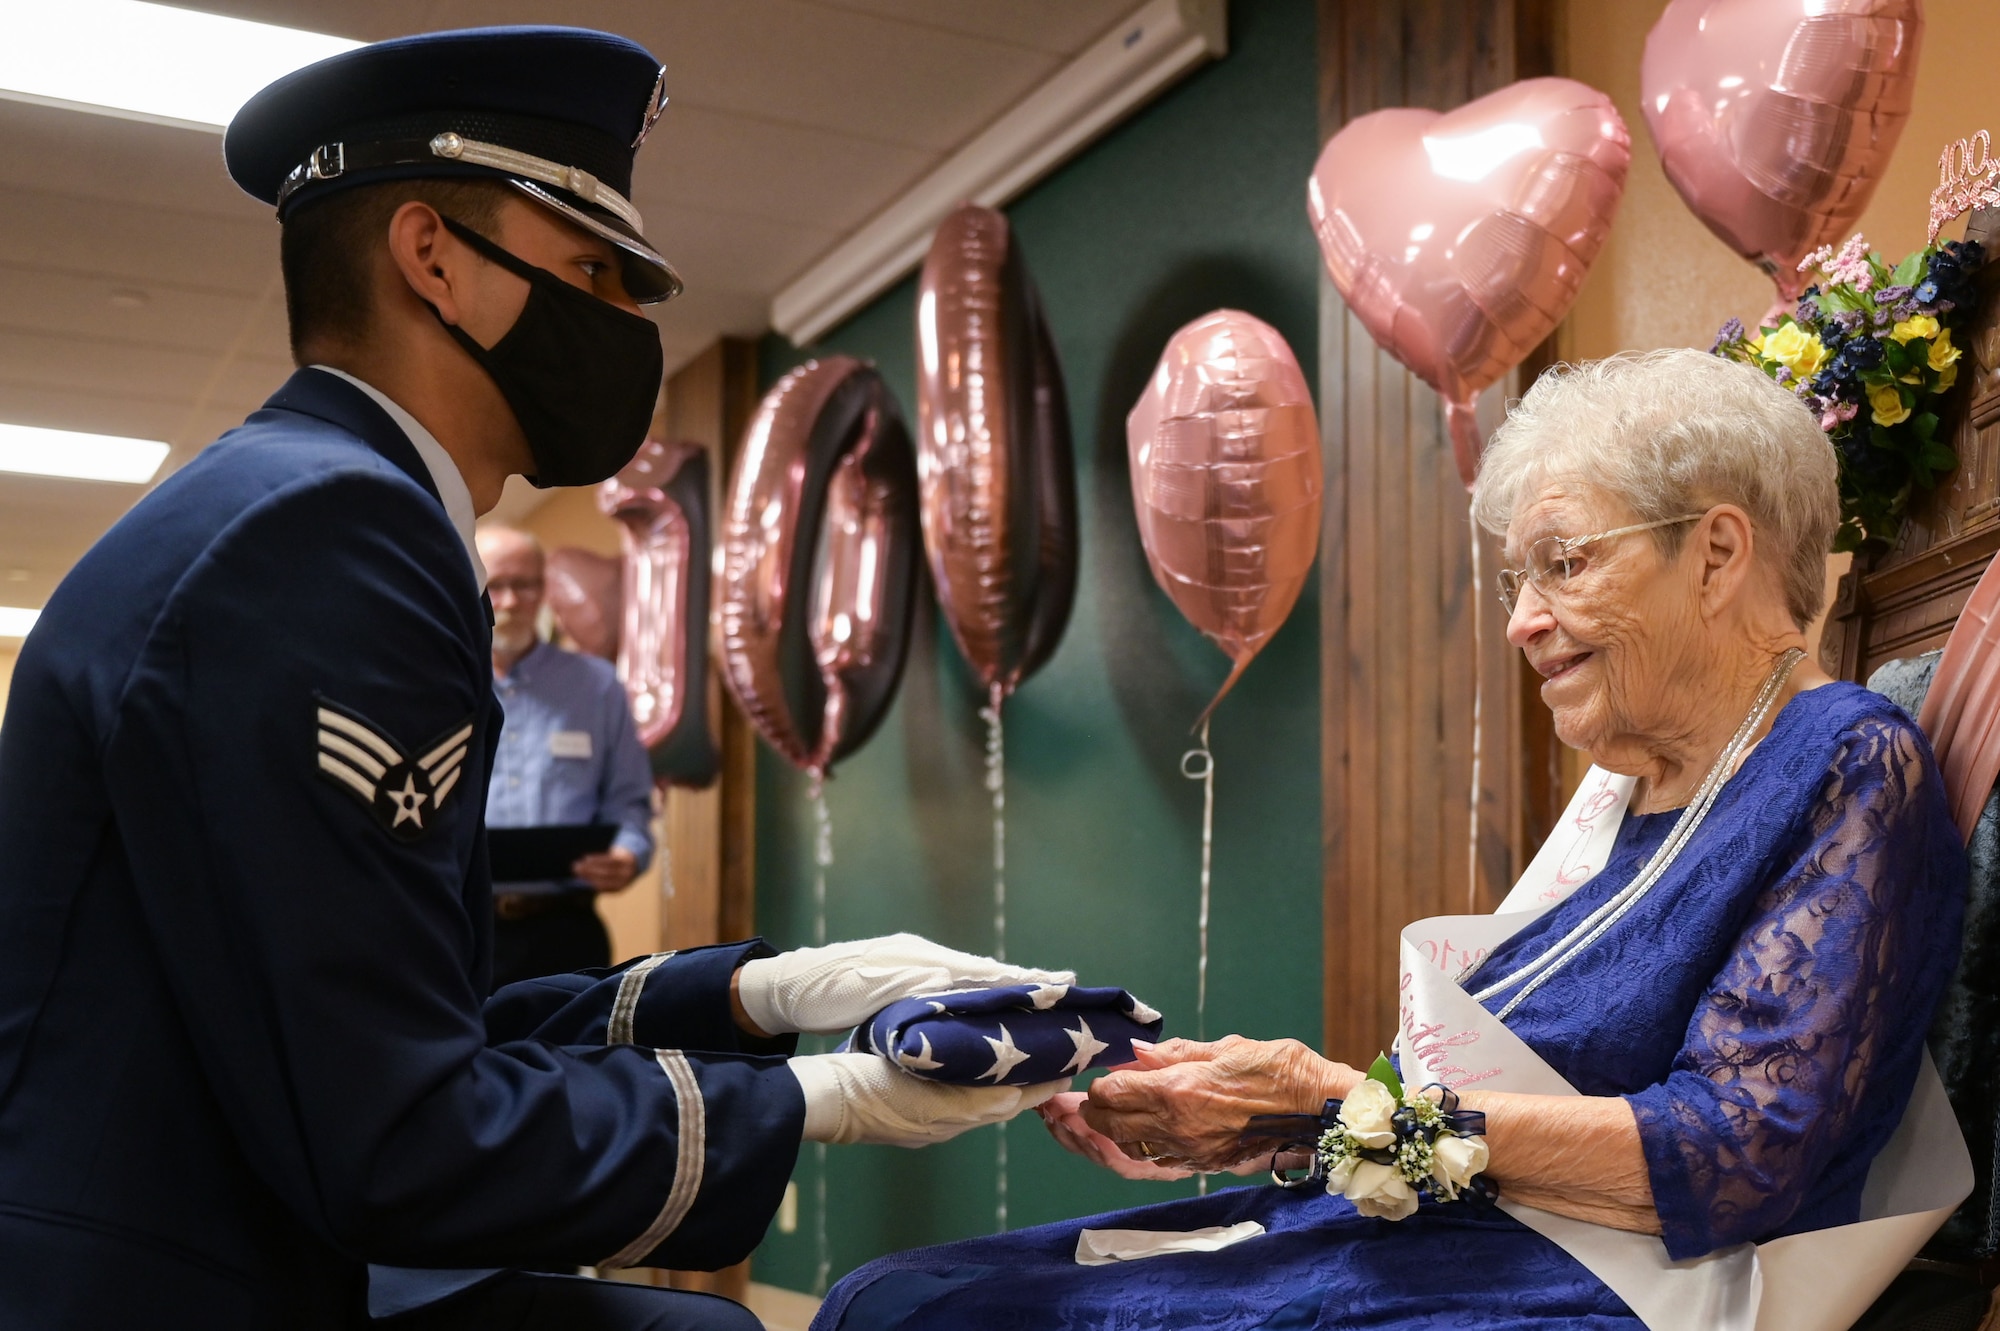 Senior Airman Christian Luna, 22nd Force Support Squadron honor guardsman, presents a flag to Fran Harris, former secretary for the Base Supply commander at Ellsworth Air Force Base, S.D., during her birthday in Rapid City, S.D., Sept. 11, 2021